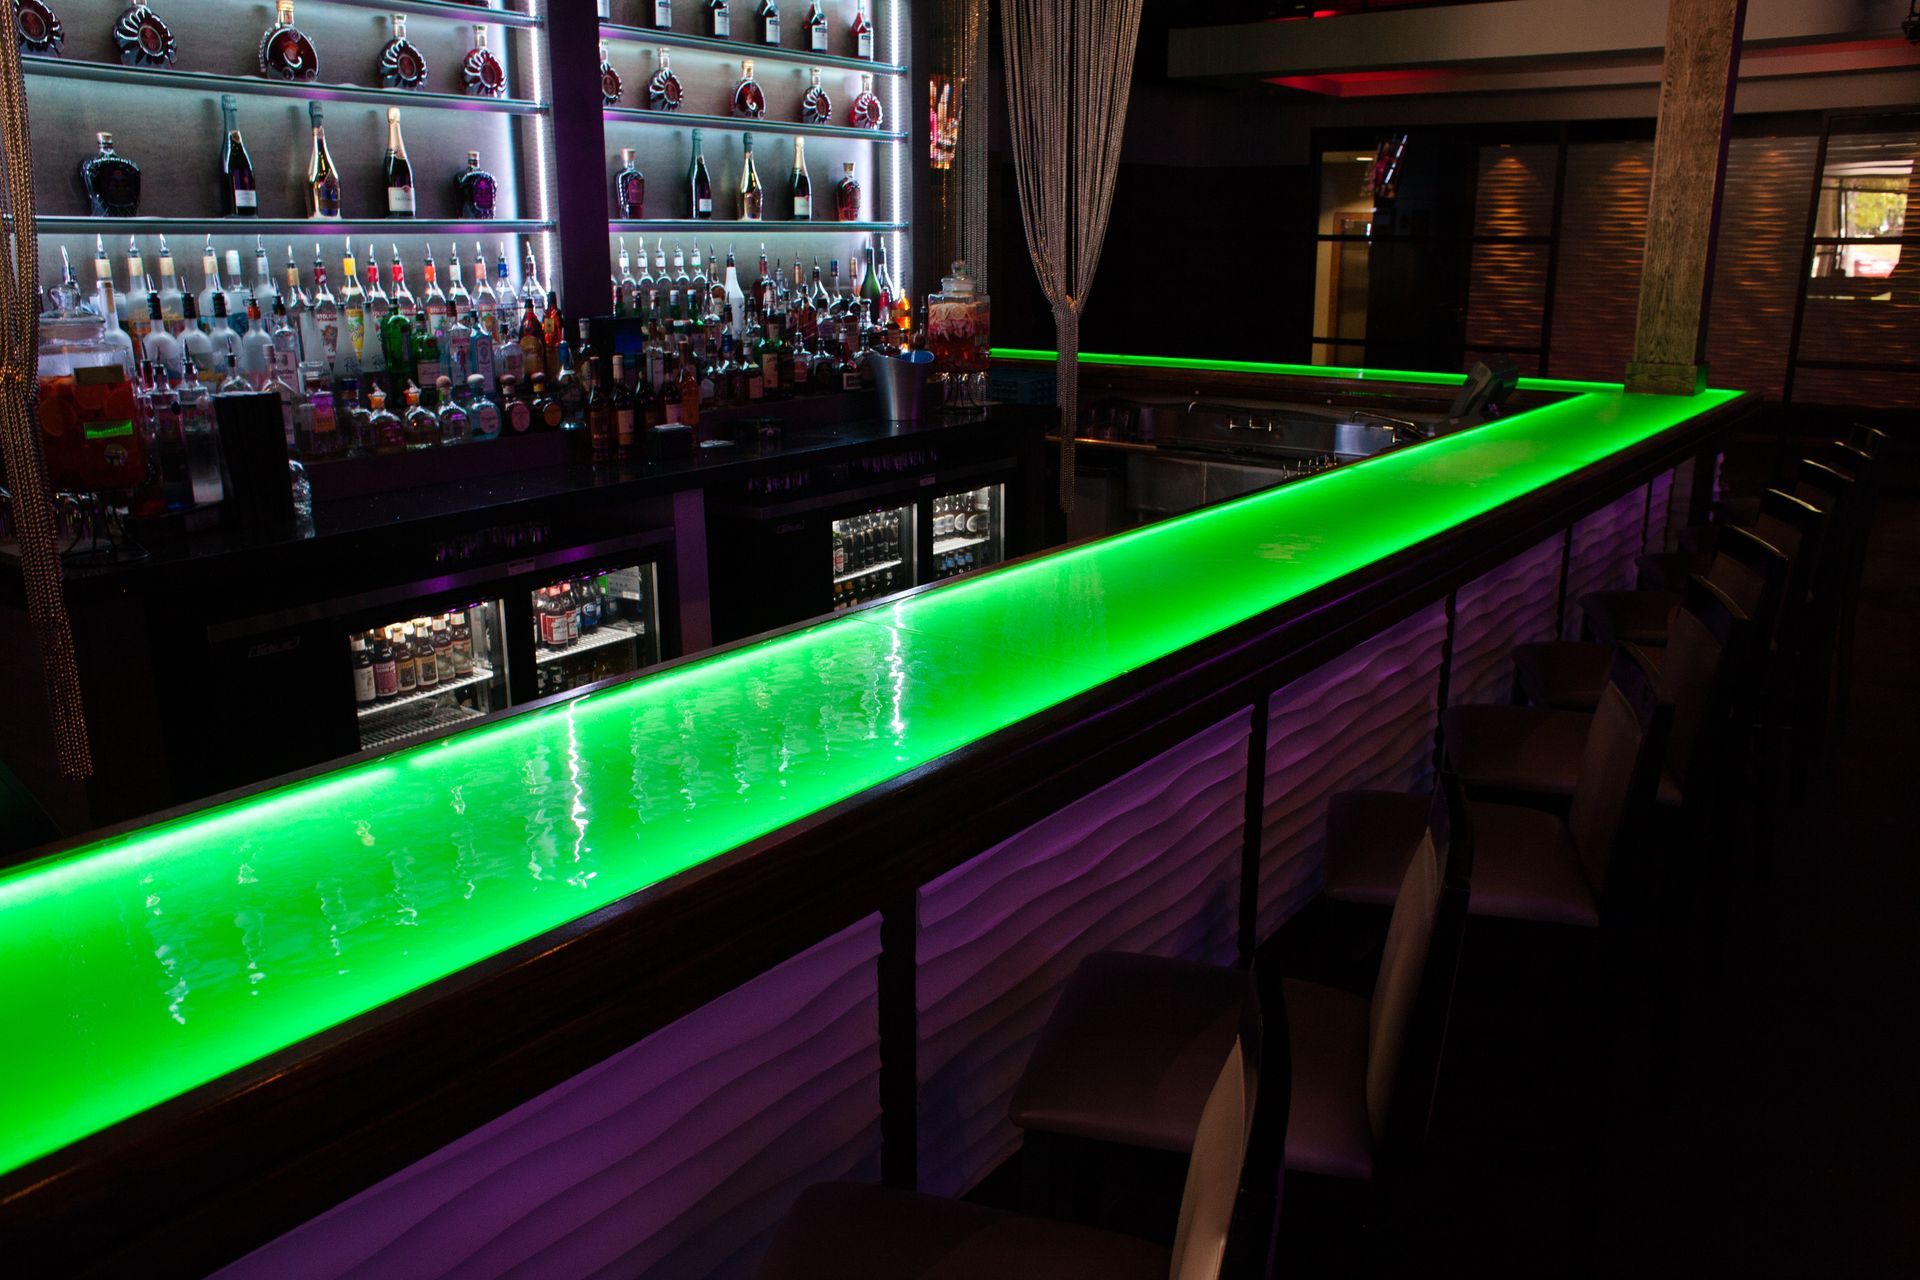 Glass countertop with integrated LED lights glowing a neon green at a bar.